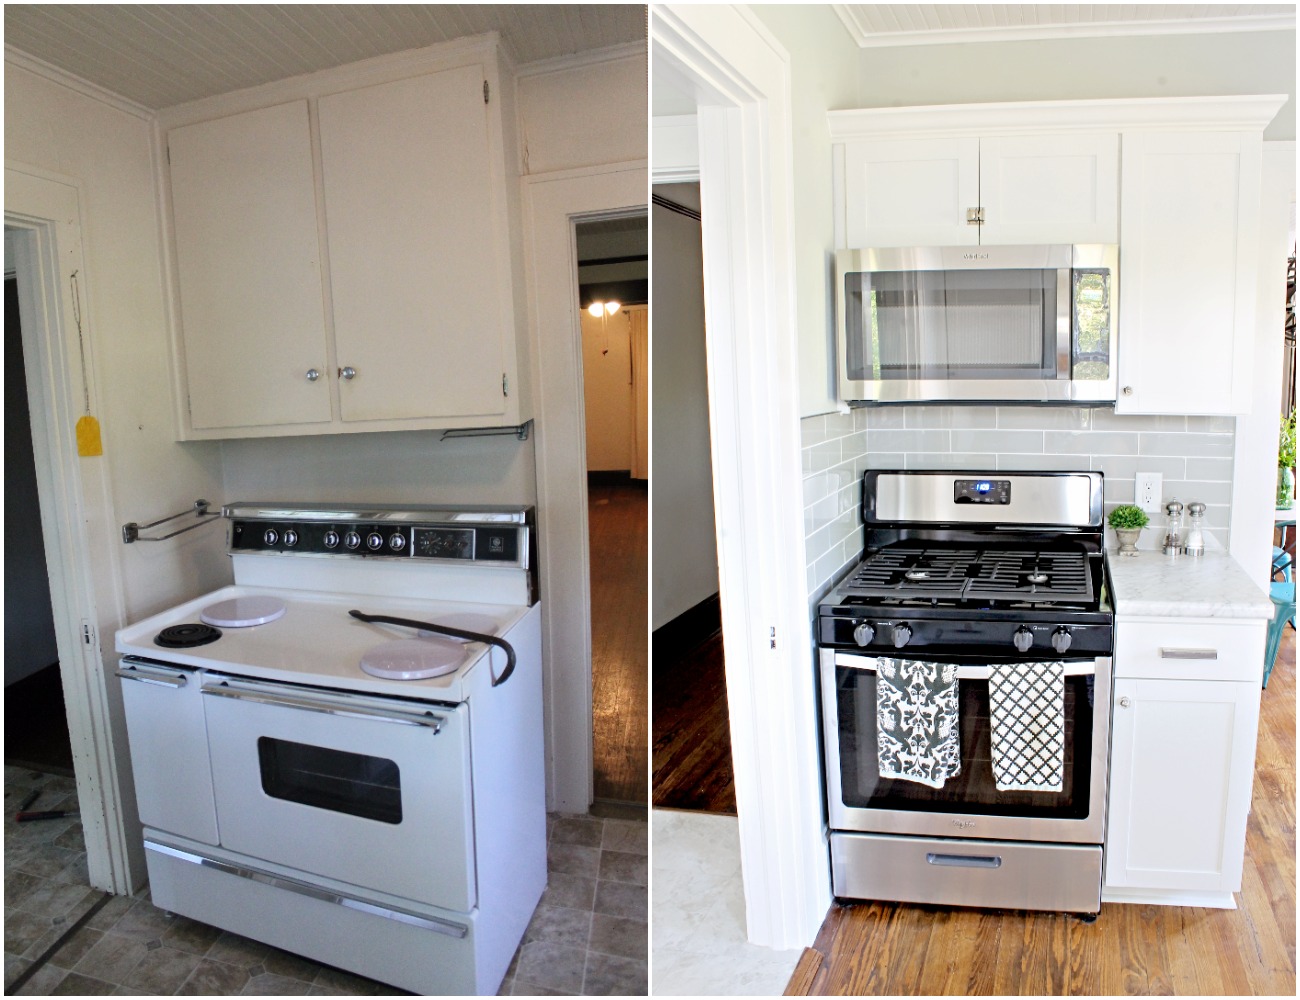 House Flipping Before and Afters - DIY BUDGET KITCHEN IDEAS WHITE SHAKER CABINETS (1).jpg